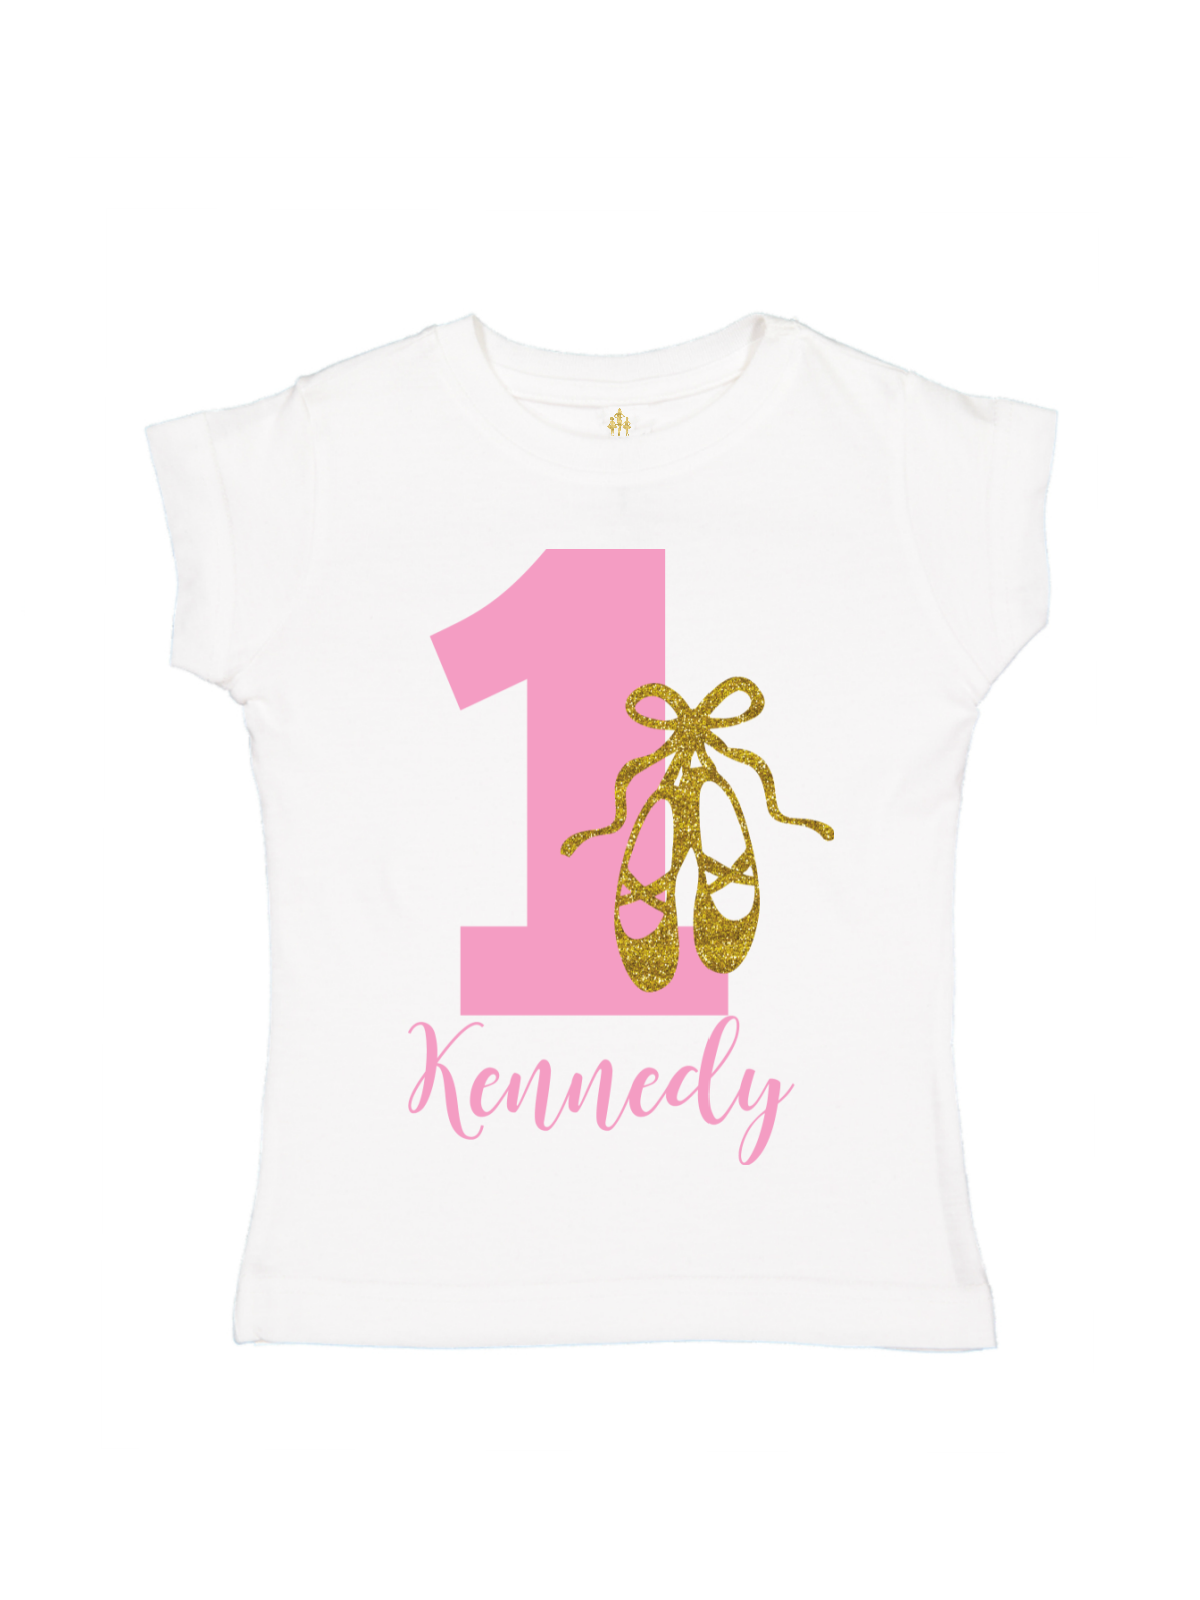 Pink and Gold Ballet Shoes Tutu Outfit - Personalized